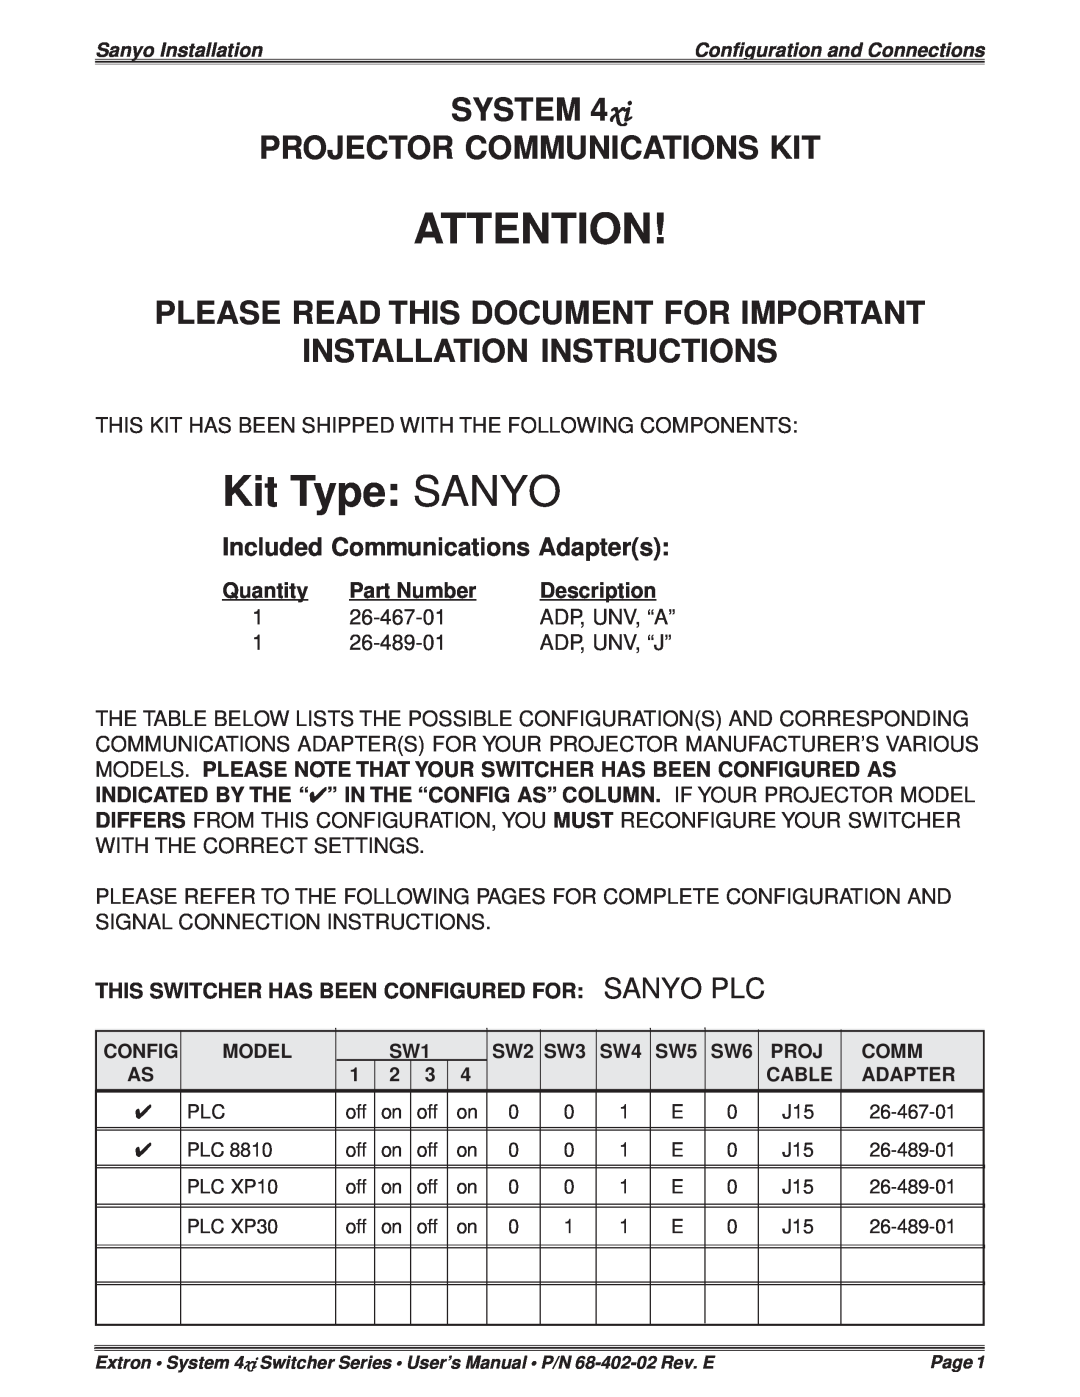 Sanyo PLC user manual Kit Type SANYO, System Projector Communications Kit, Included Communications Adapters, Quantity 